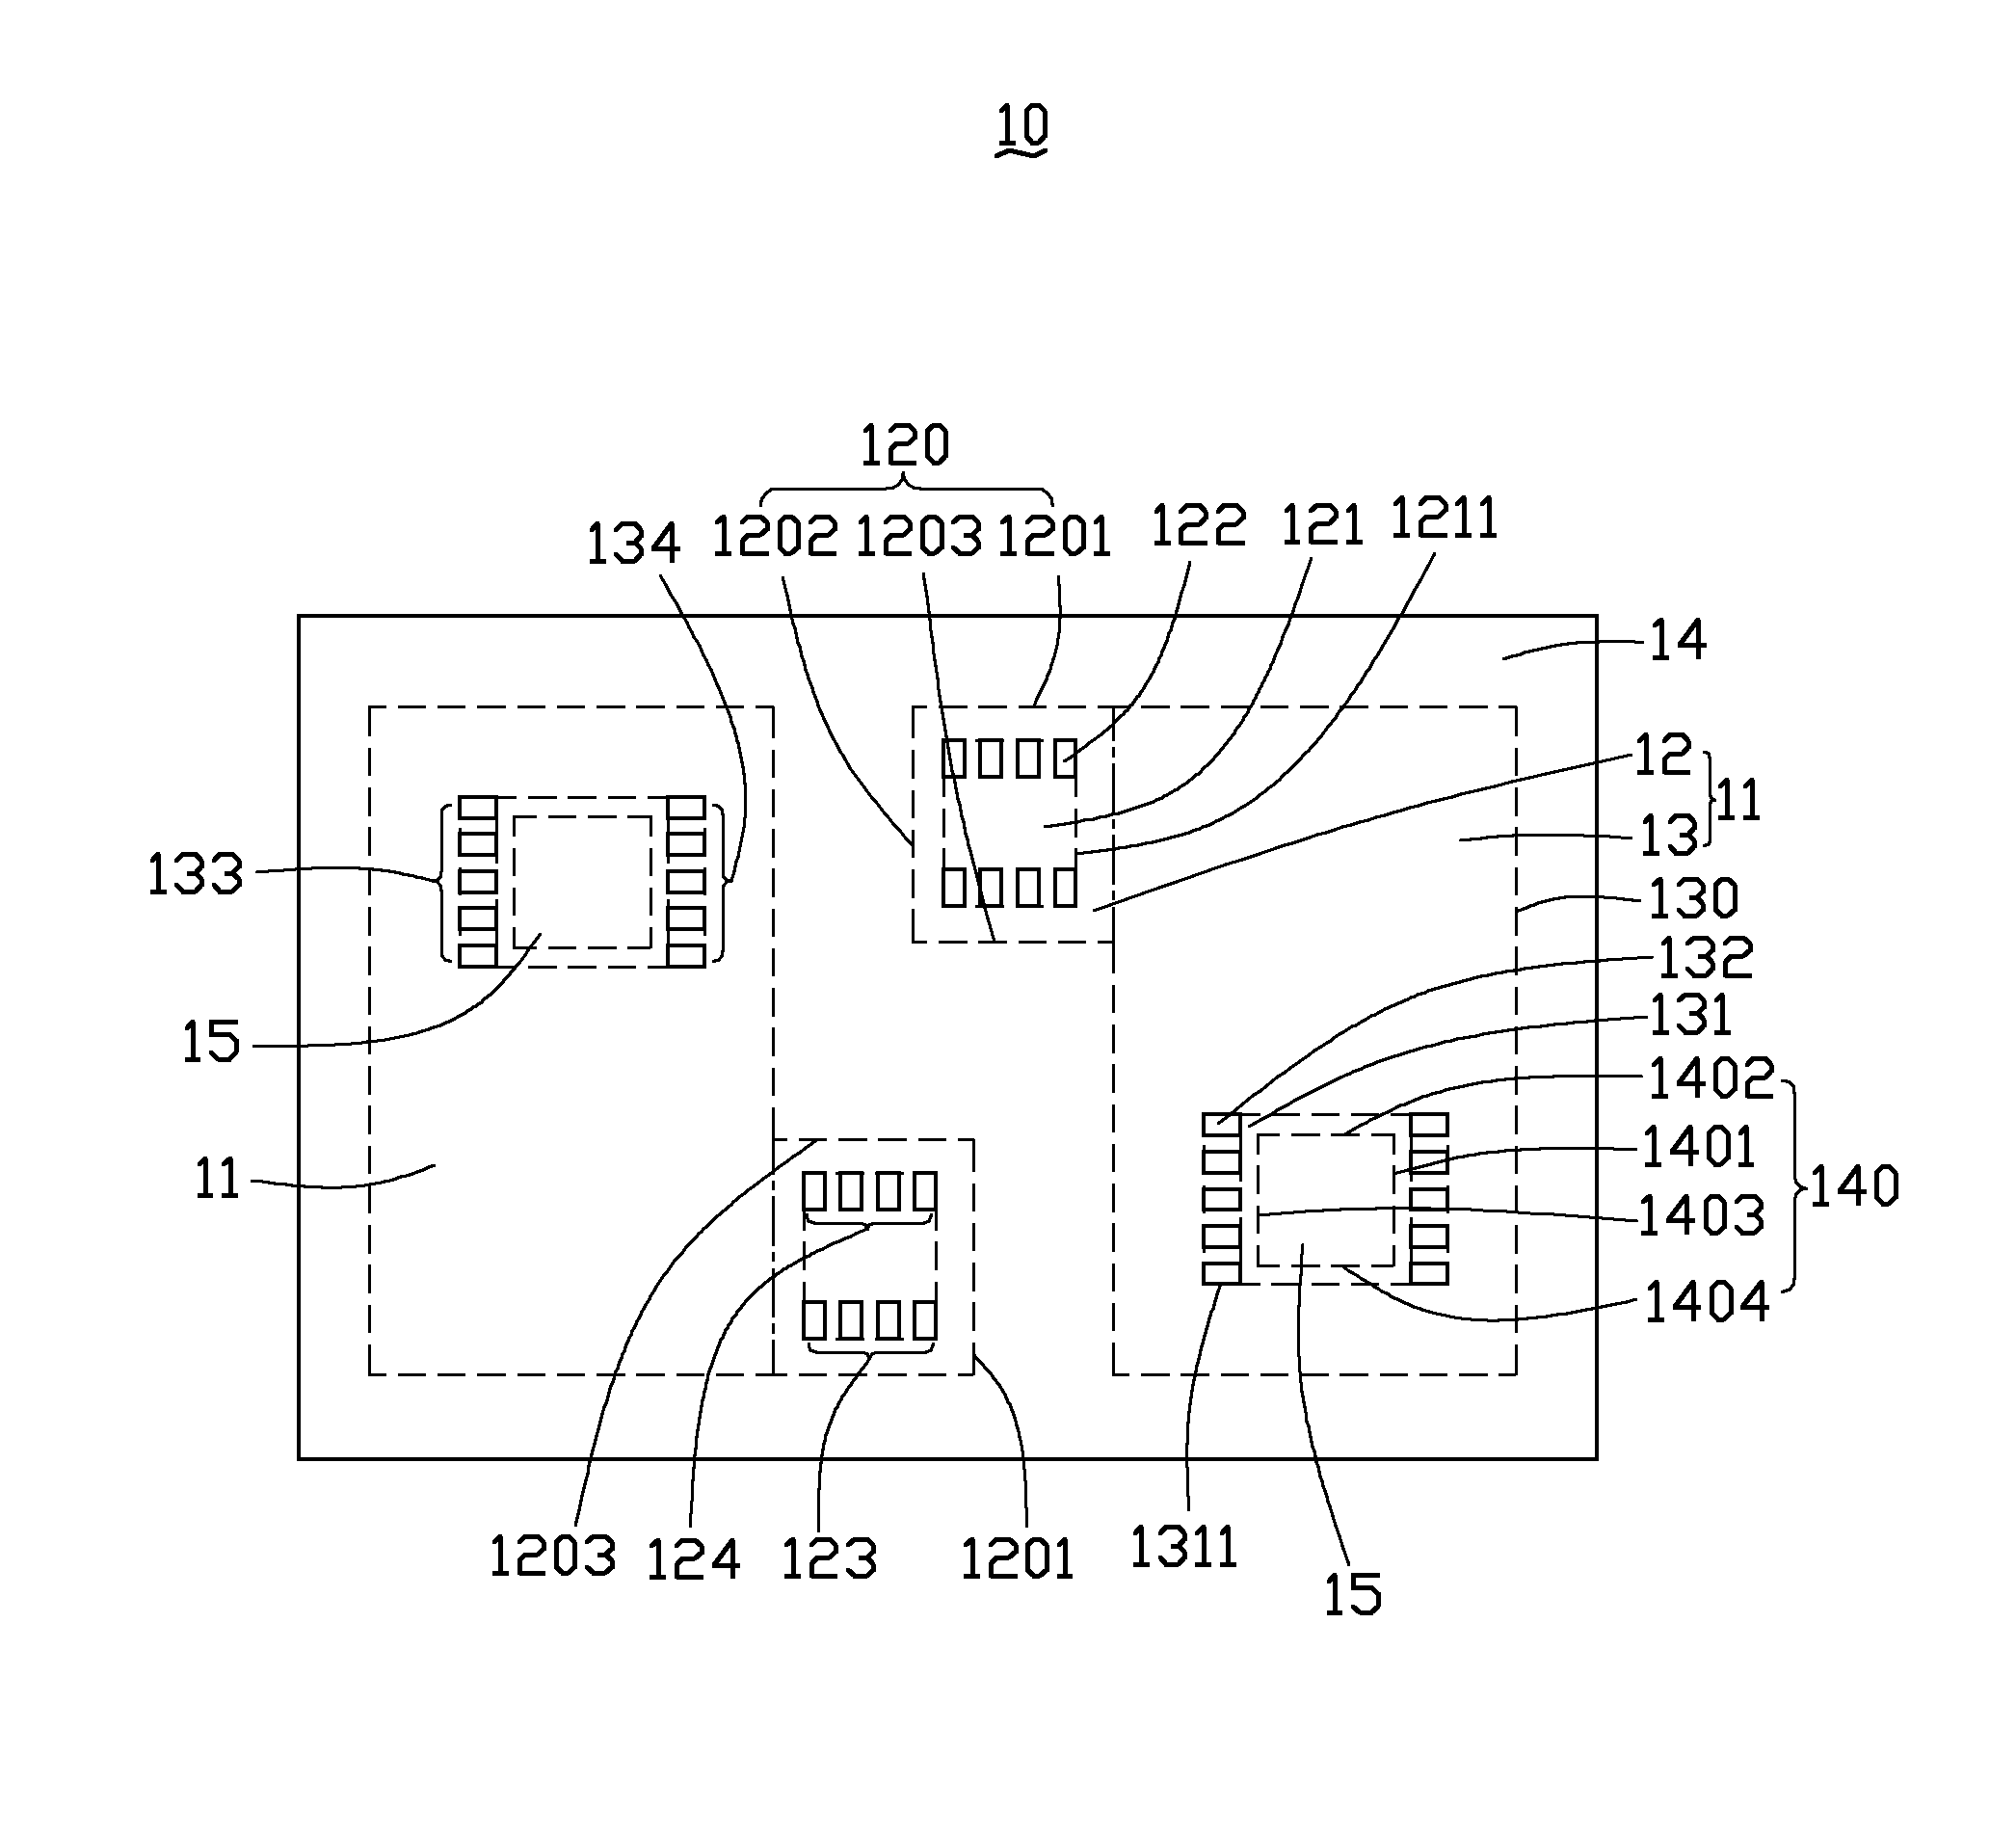 Method for manufacturing printed circuit board